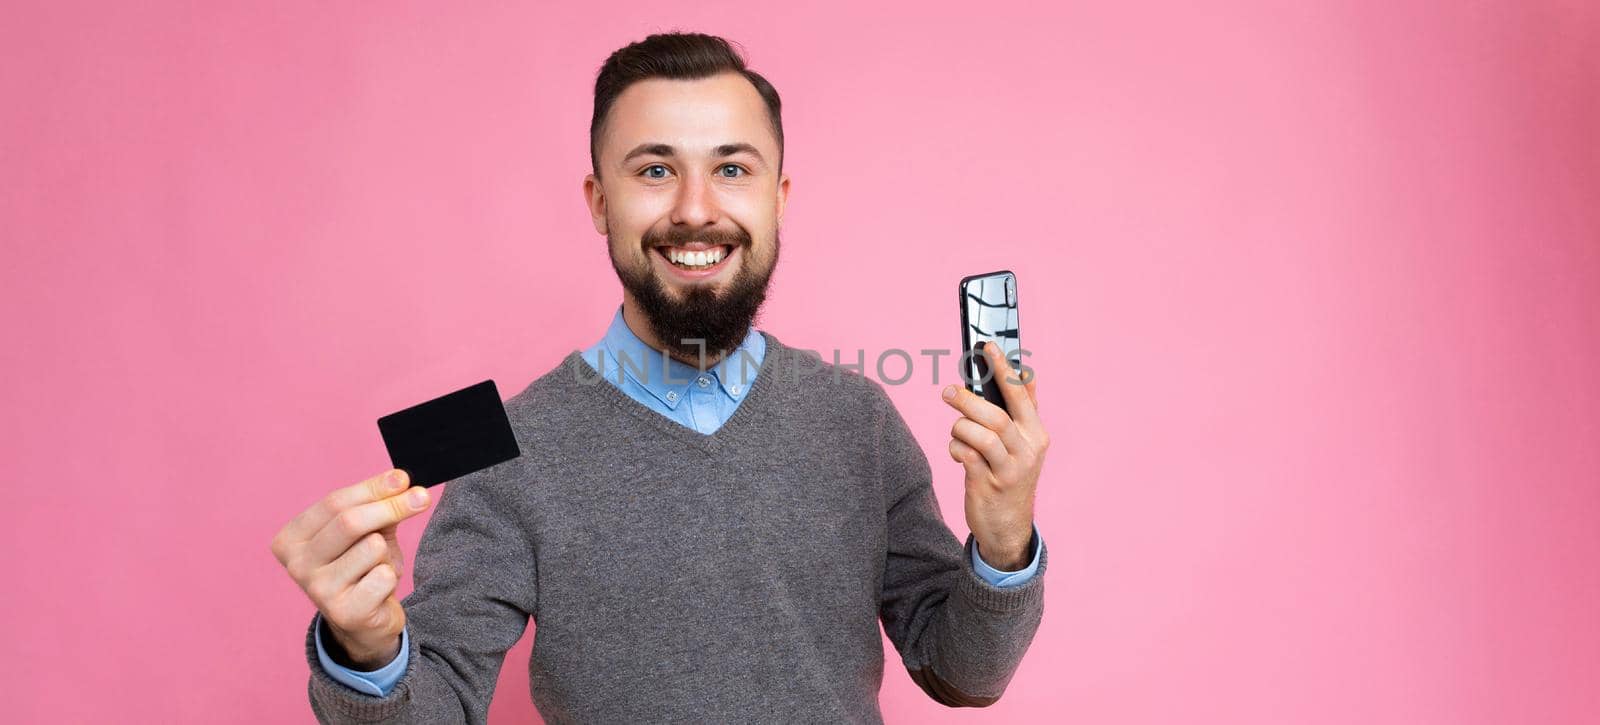 Panoramic photo shot of Handsome smiling brunette bearded young man wearing stylish grey sweater and blue shirt isolated over background wall holding credit card and mobile phone looking at camera by TRMK